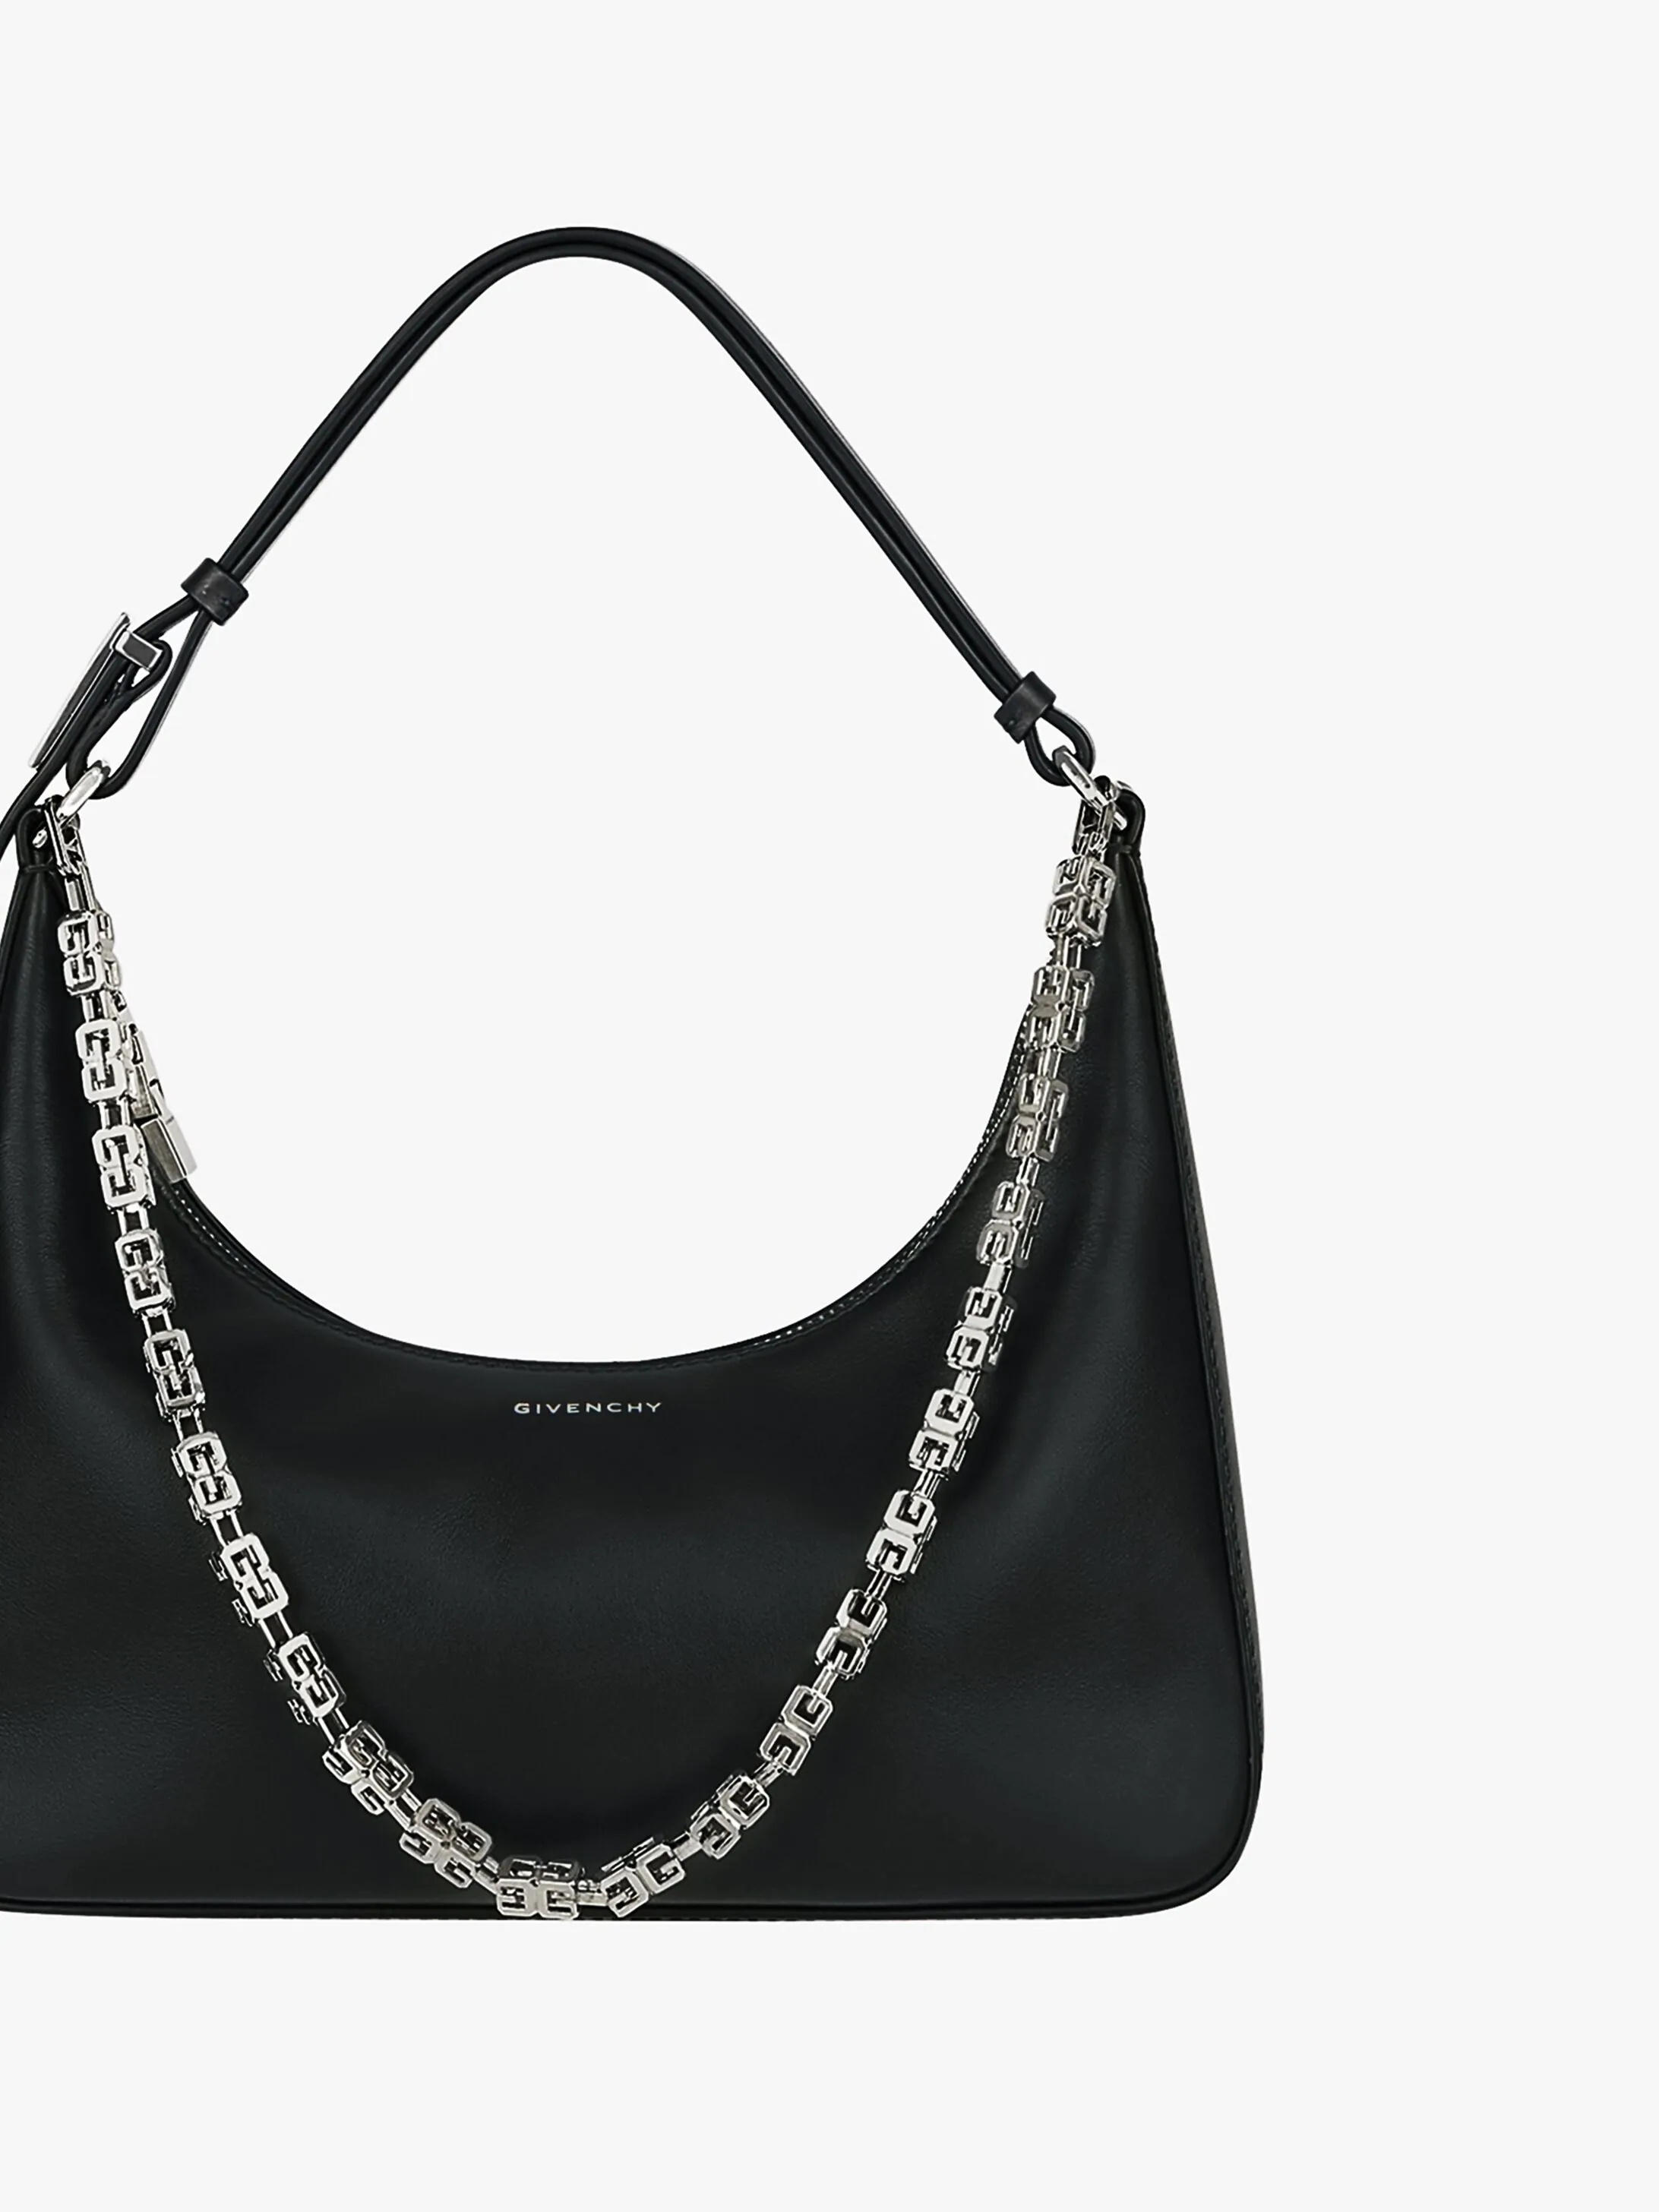 SMALL MOON CUT OUT BAG IN LEATHER WITH CHAIN - 7